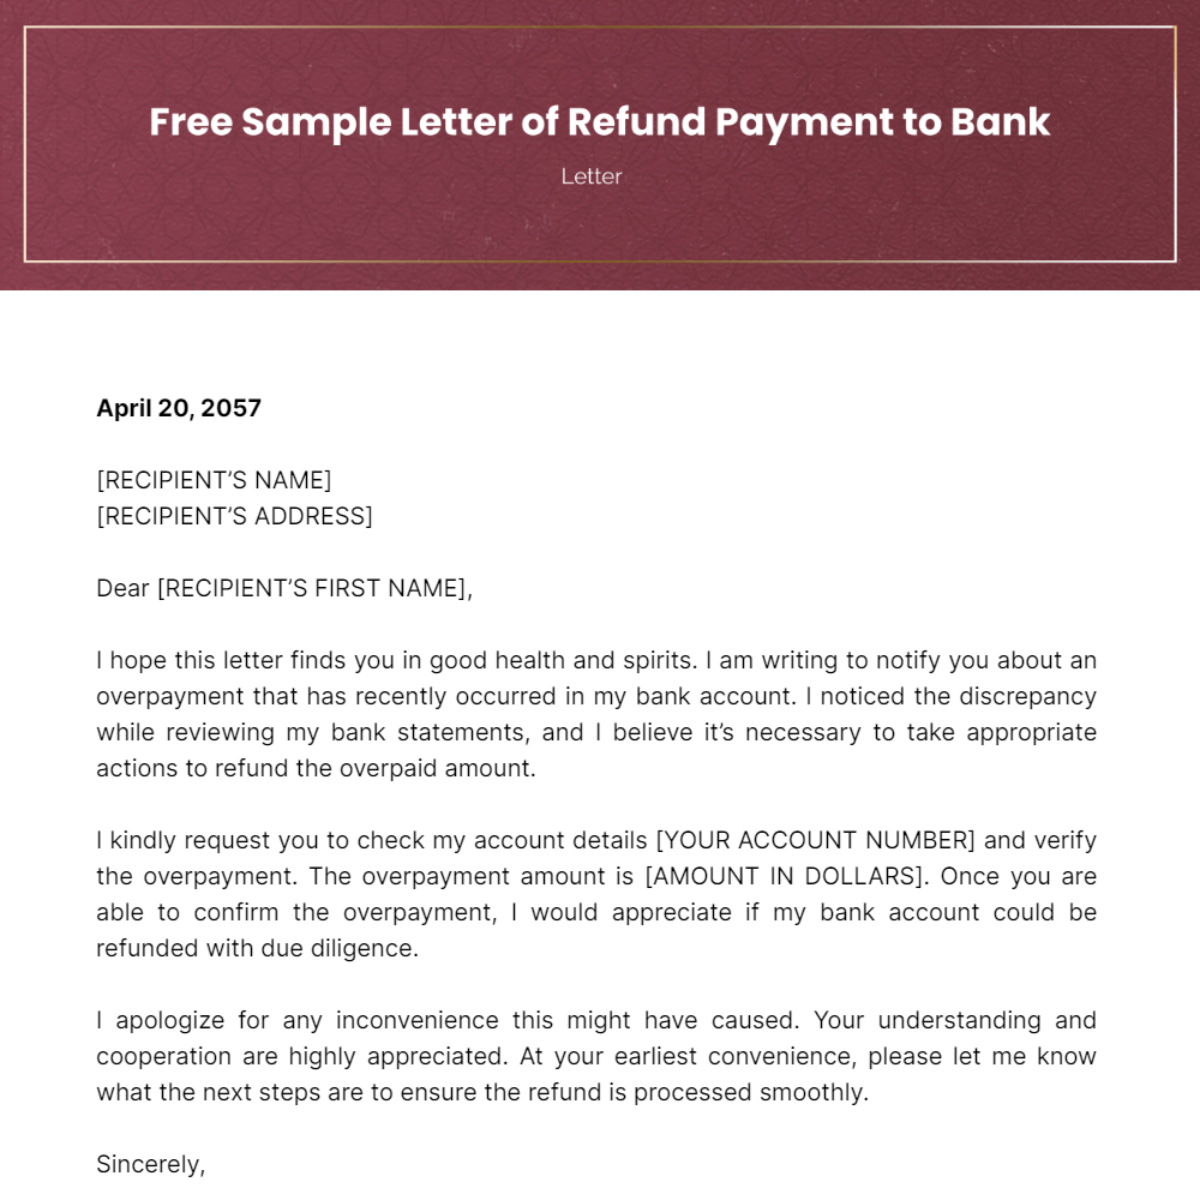 Sample Letter of Refund Payment to Bank Template